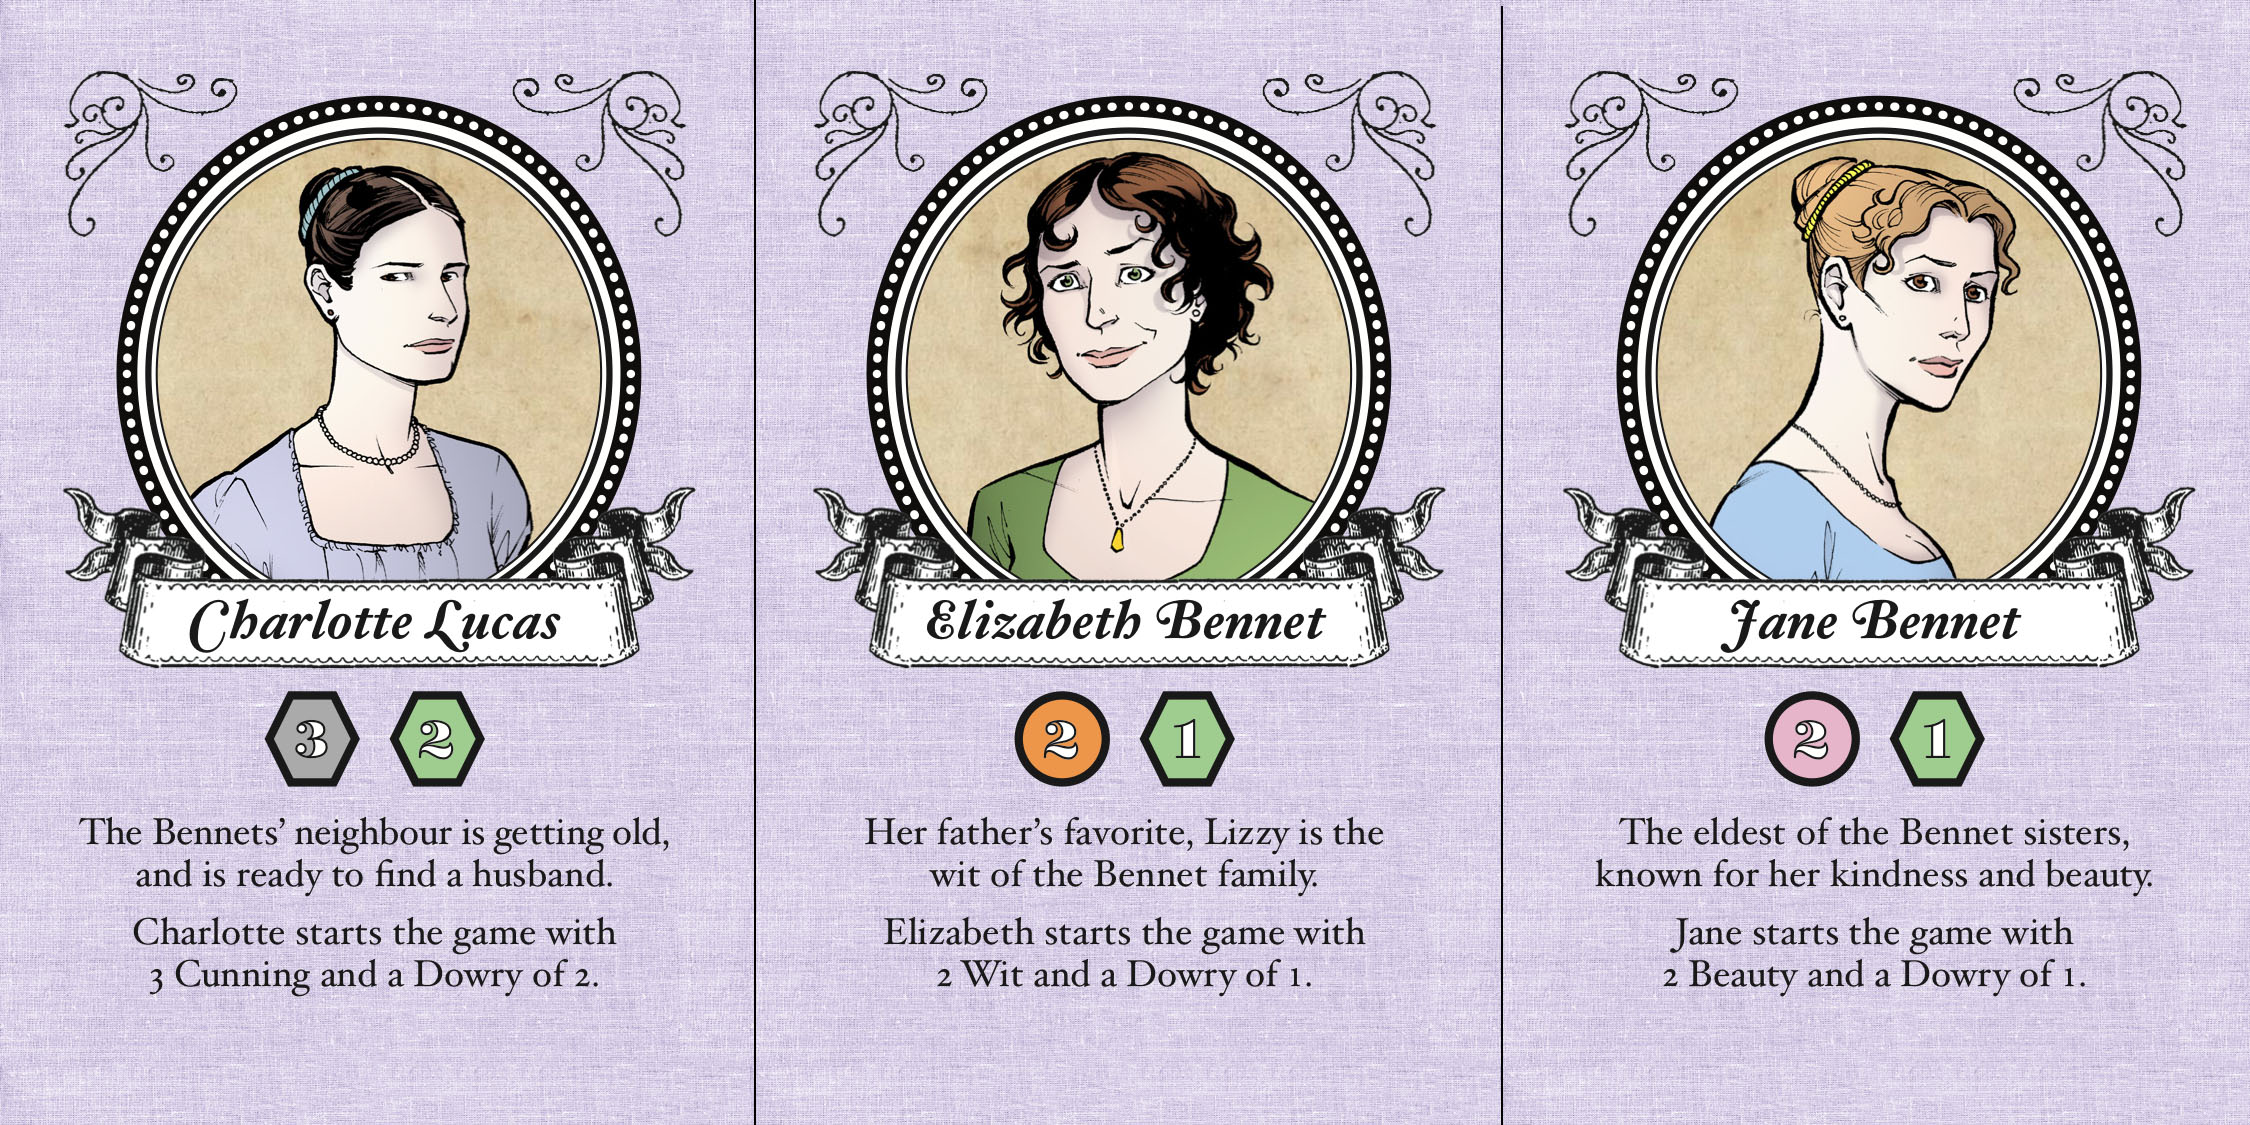 Marrying Mr Darcy- The Pride and Prejudice Board Game: interview with Erika...